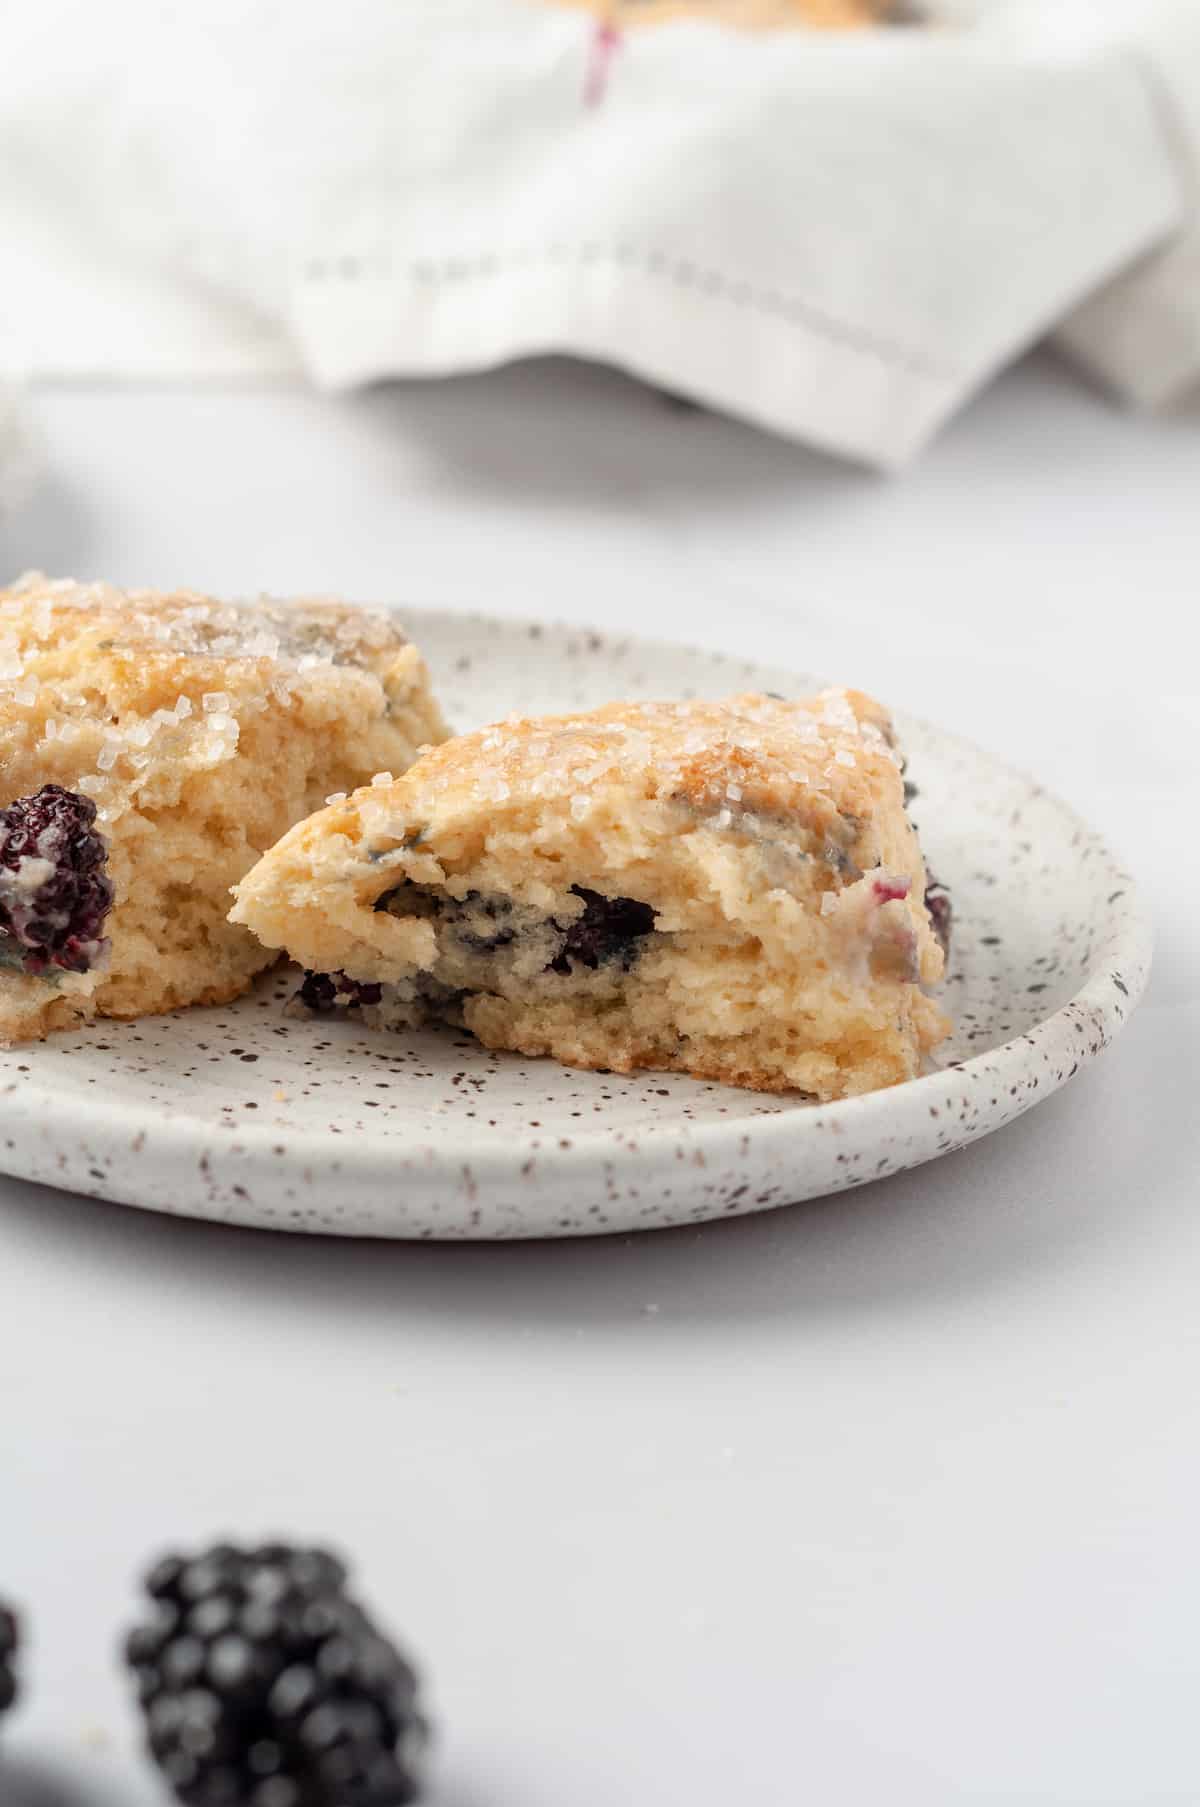 Two blackberry scones on plate